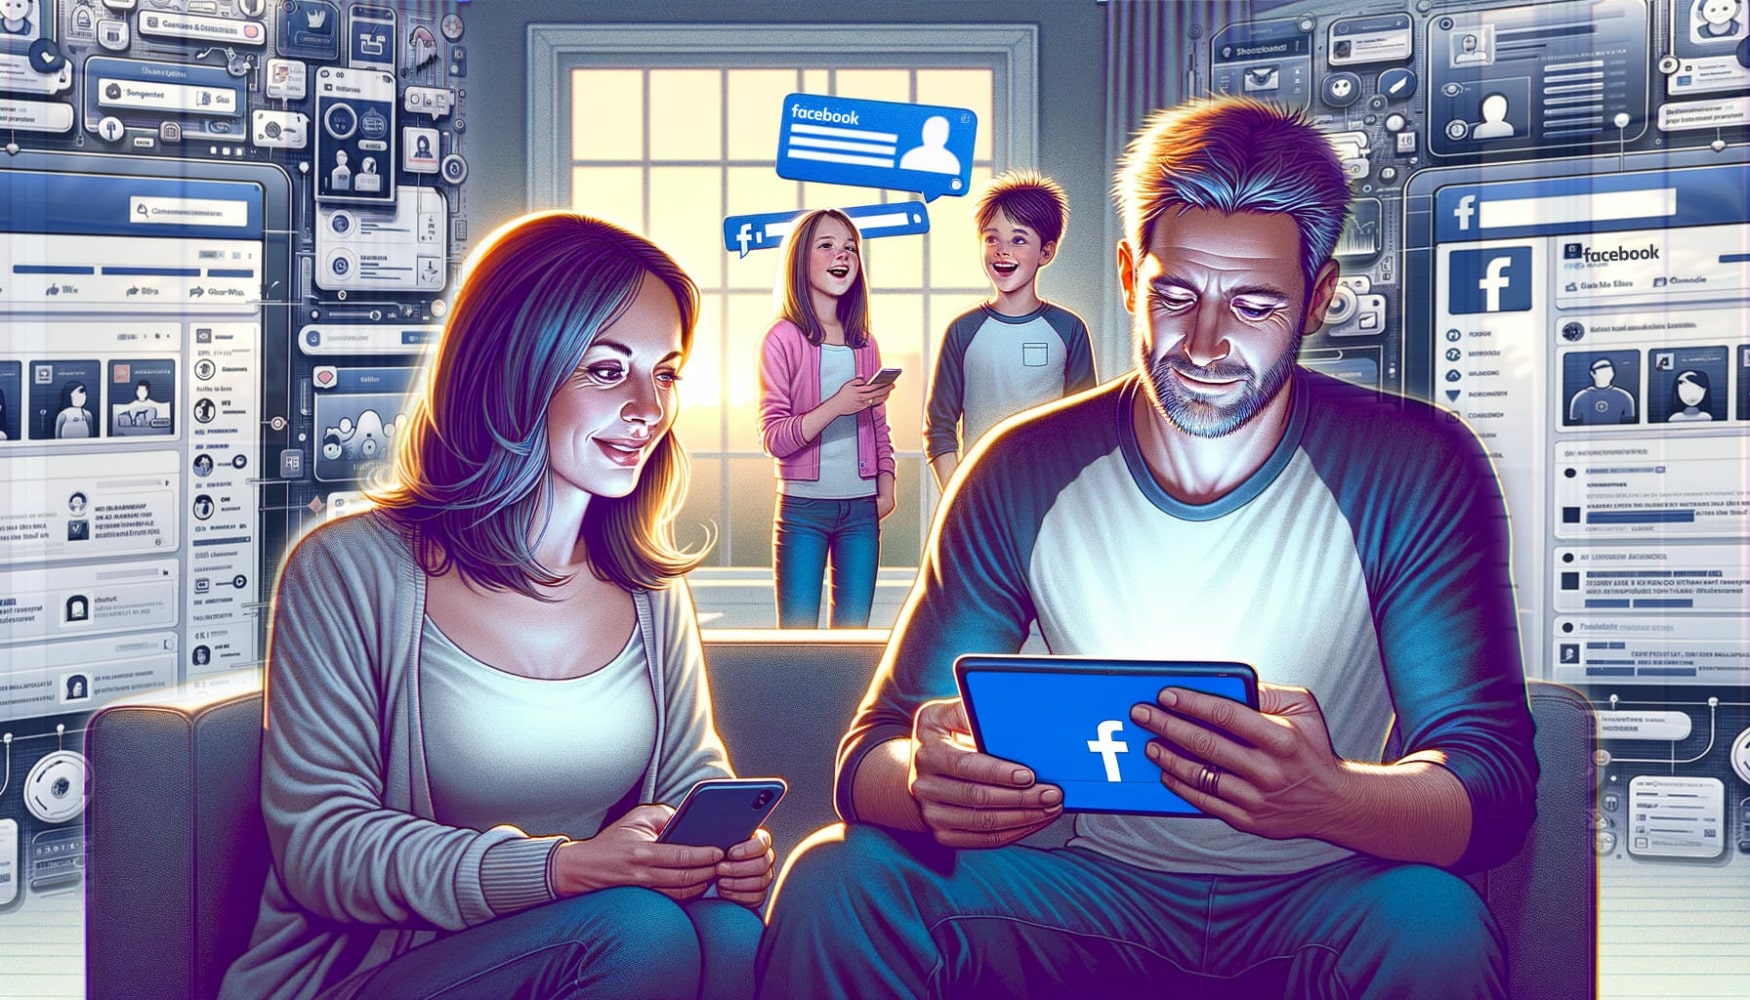 In the foreground of the image, two parents are holding gadgets and looking at them using Facebook's parental control feature, in the background are two children laughing and holding their phones, and on the walls of the room are images of Facebook information